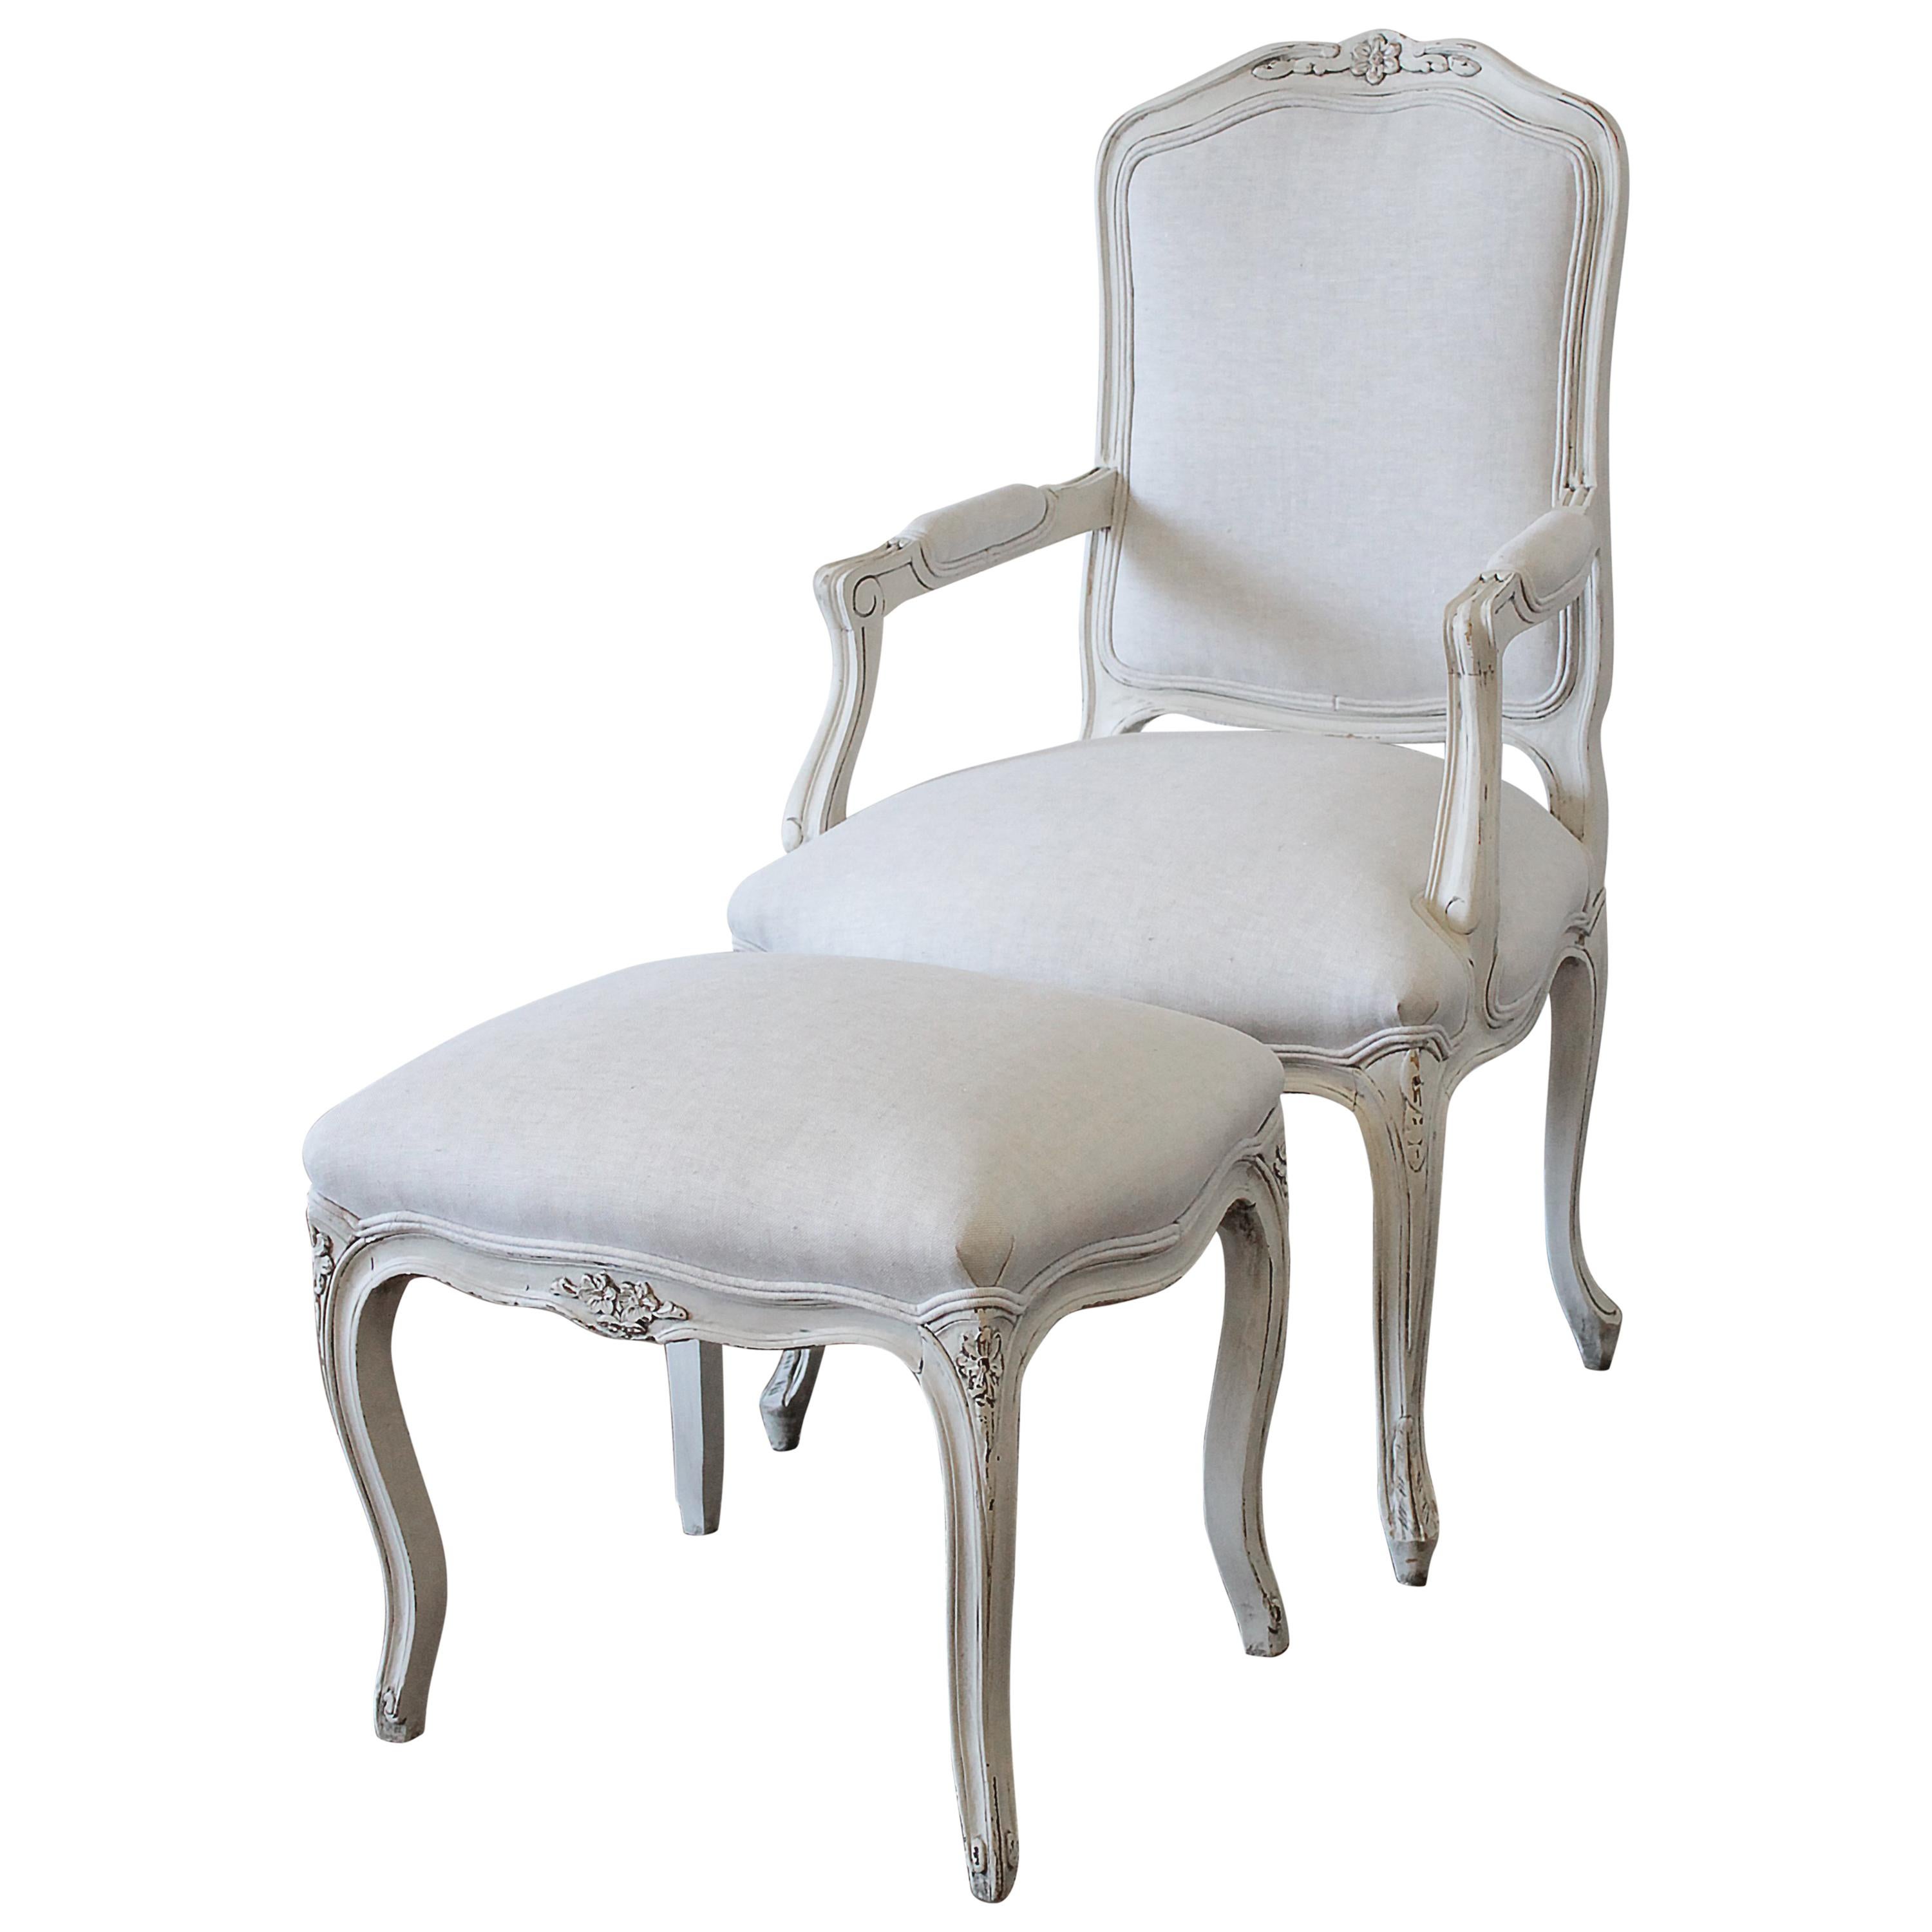 Painted French Provincial Style Chair and Ottoman Upholstered in Belgian Linen